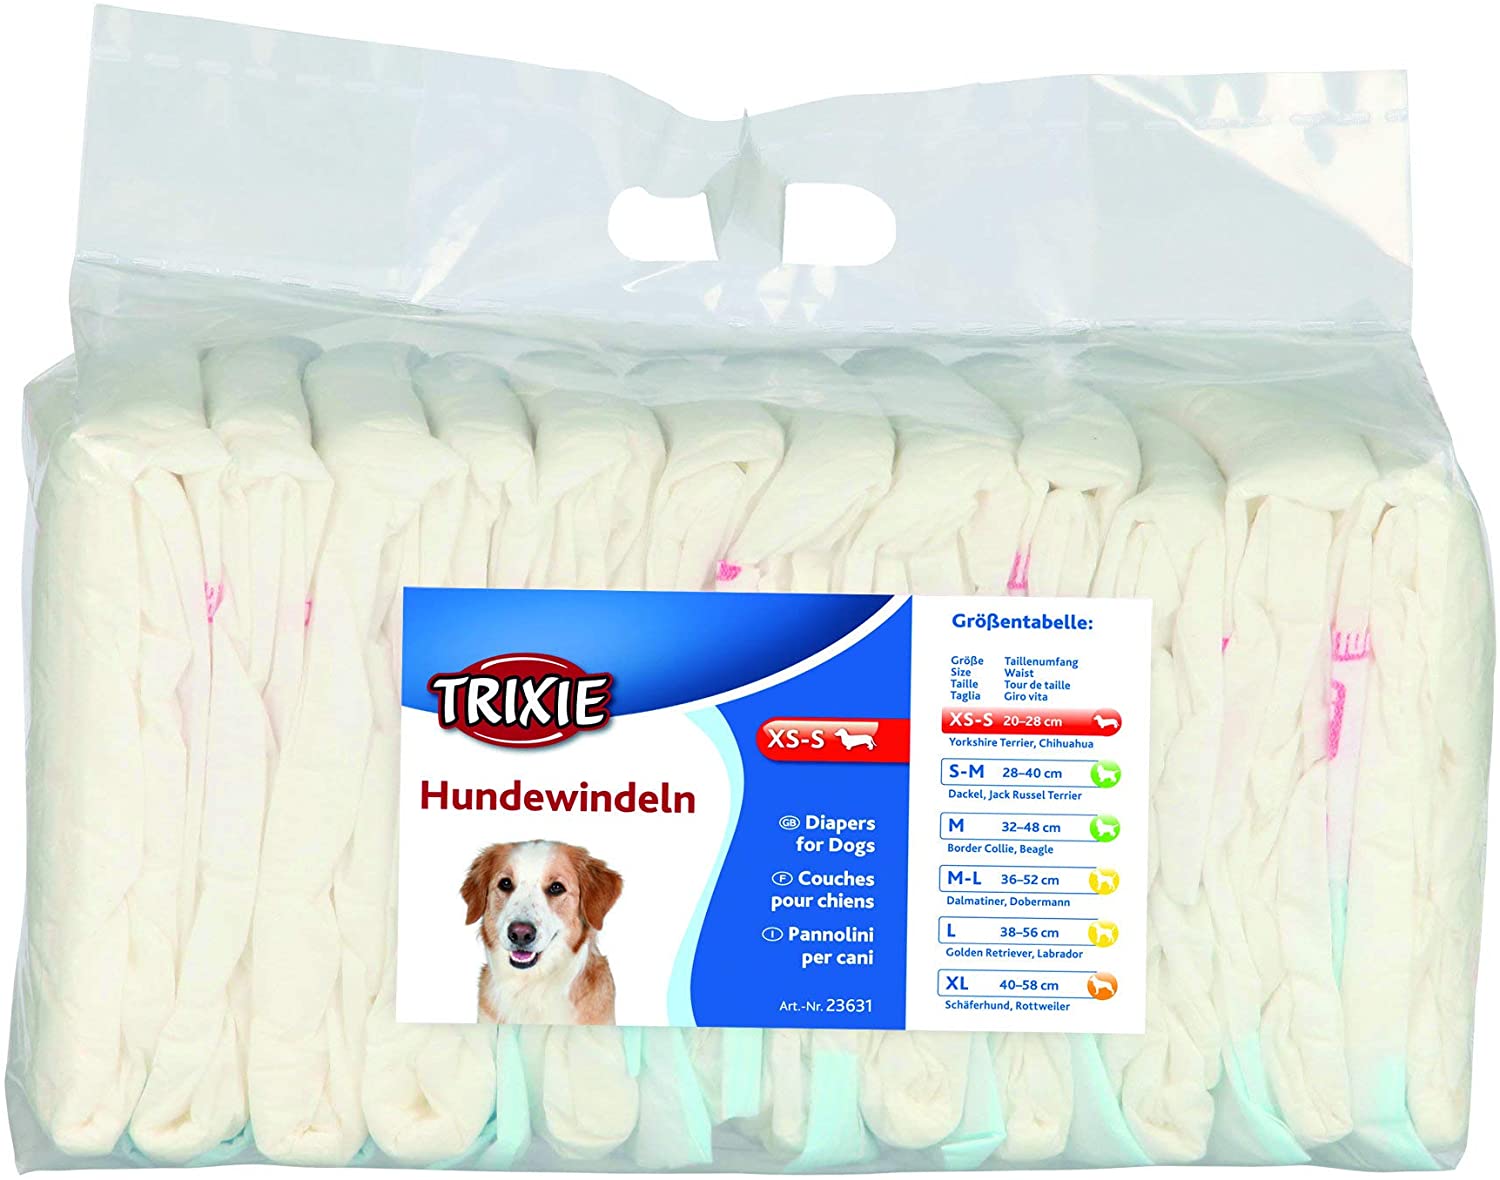  Trixie 12 Pañales Perros Ultra absorbentes, XS-S 